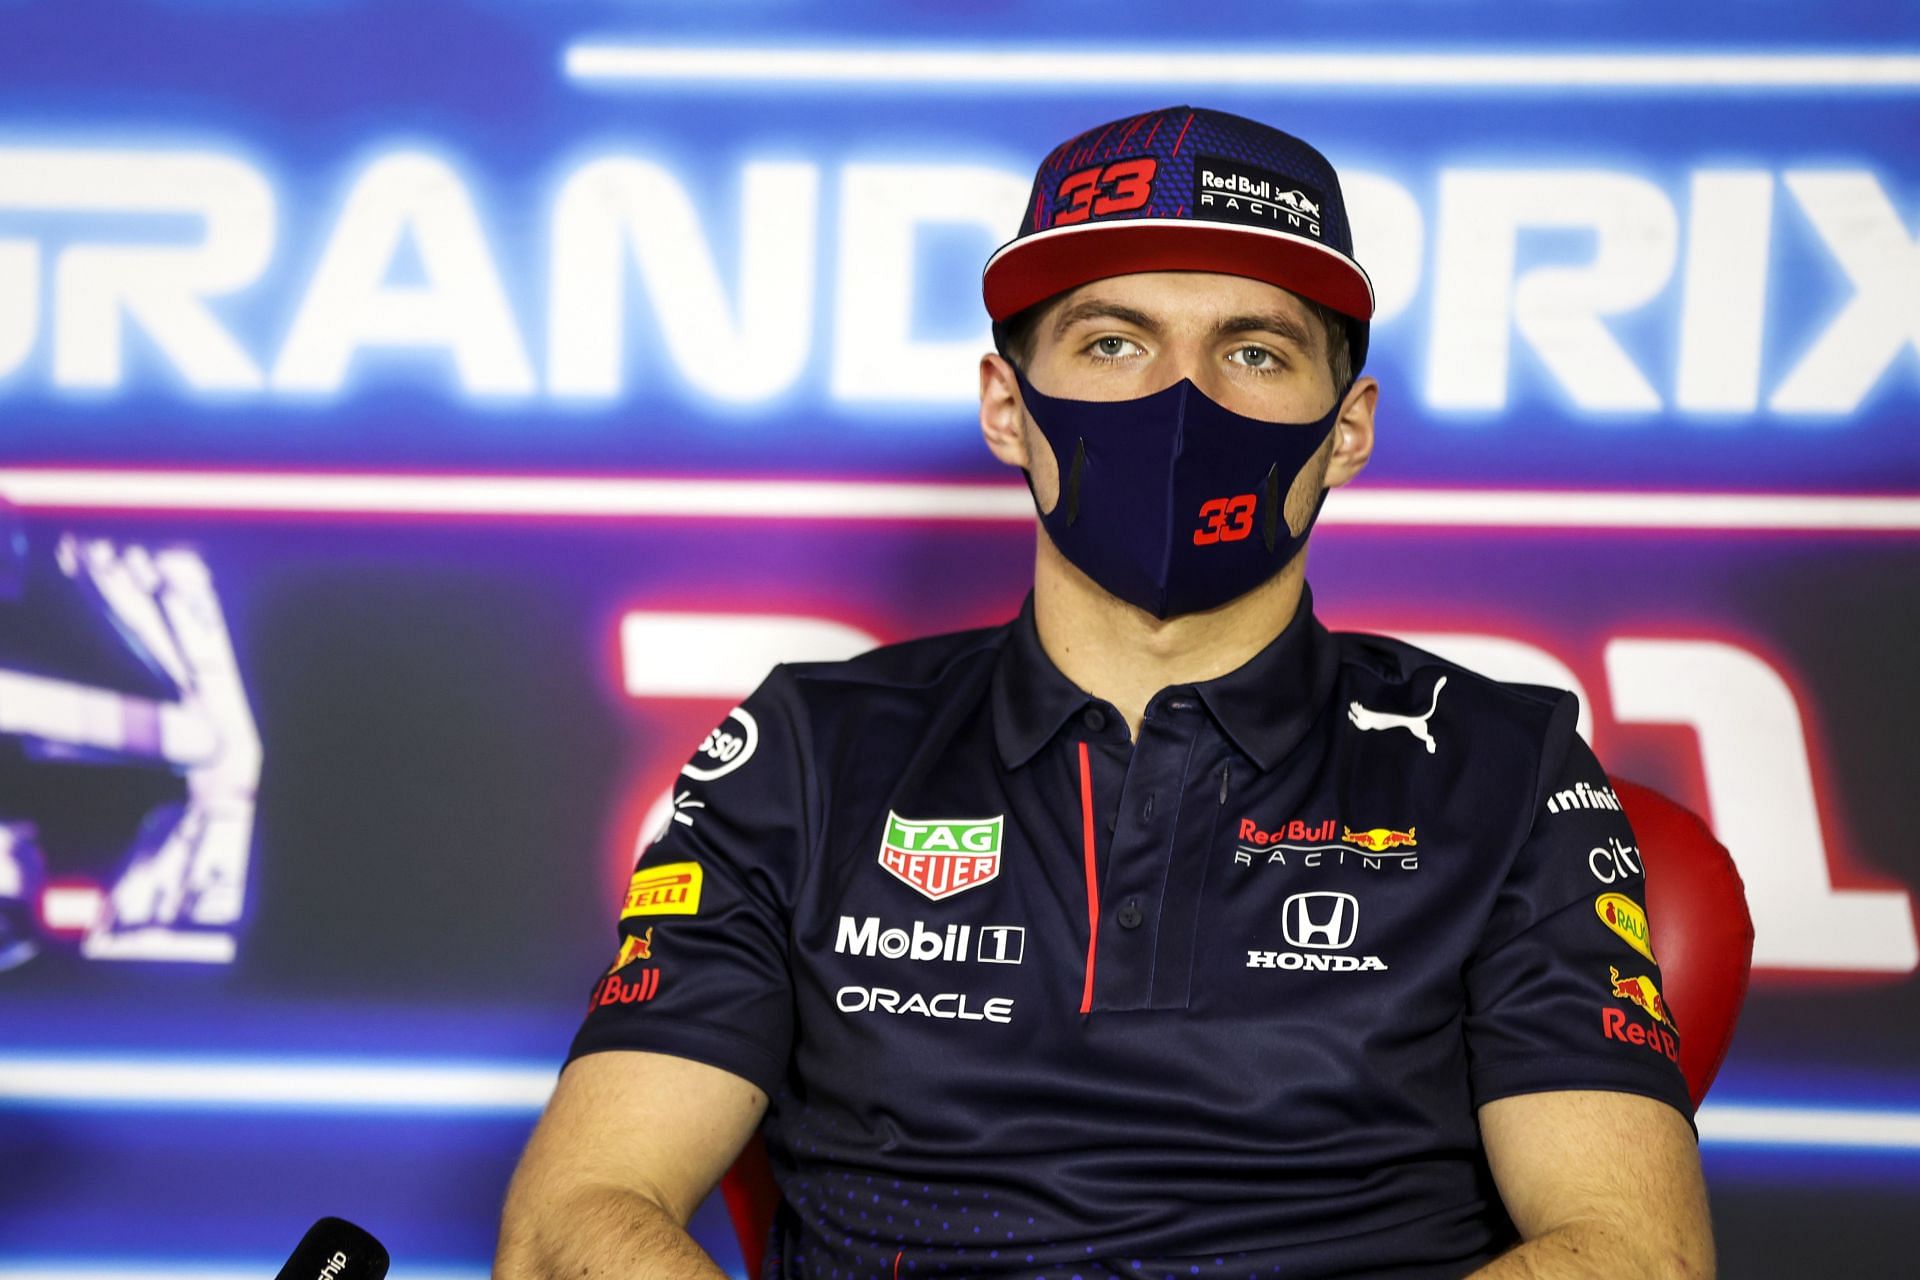 Max Verstappen talks in the Drivers Press Conference during previews ahead of the 2021 Abu Dhabi Grand Prix. (Photo by Antonin Vincent - Pool/Getty Images)